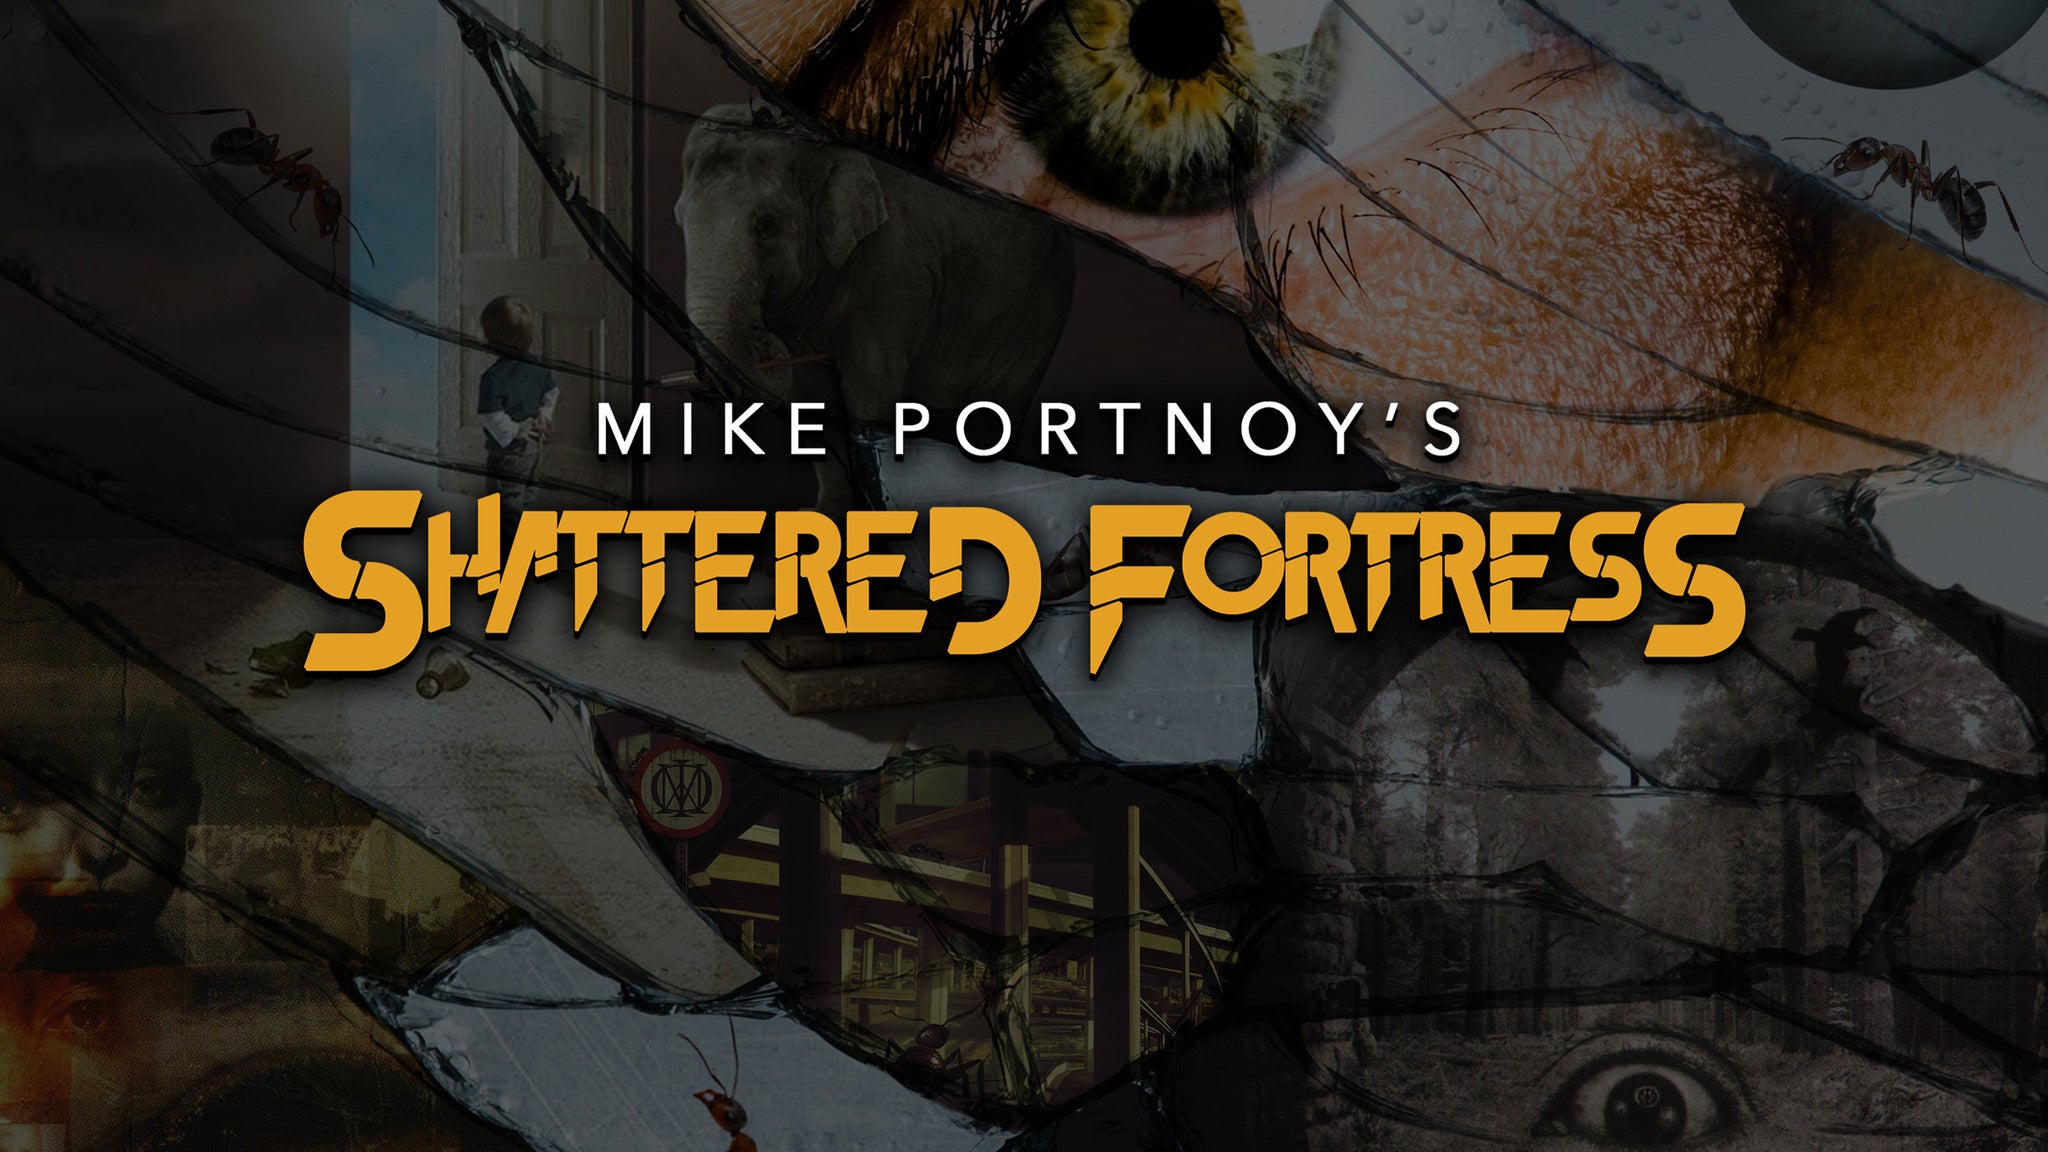 Mike Portnoy's Shattered Fortress playing Dream Theaters 12 Step Suite in New York promo photo for Fanclub presale offer code